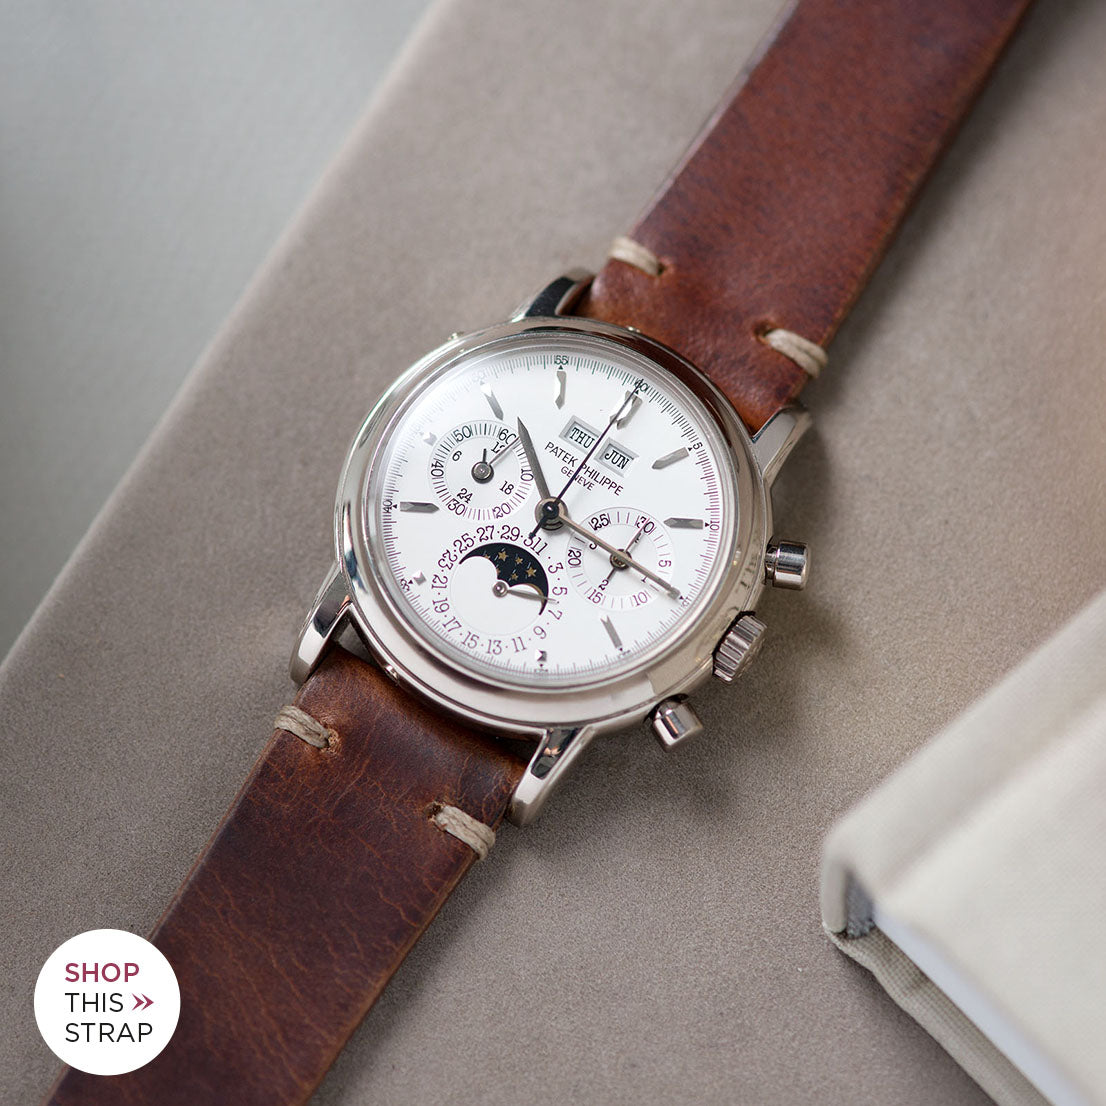 Bulang and Sons_Strap Guide_The Patek Philippe 3970 G White Gold Perpetual Calendar_Siena Brown Leather Watch Strap